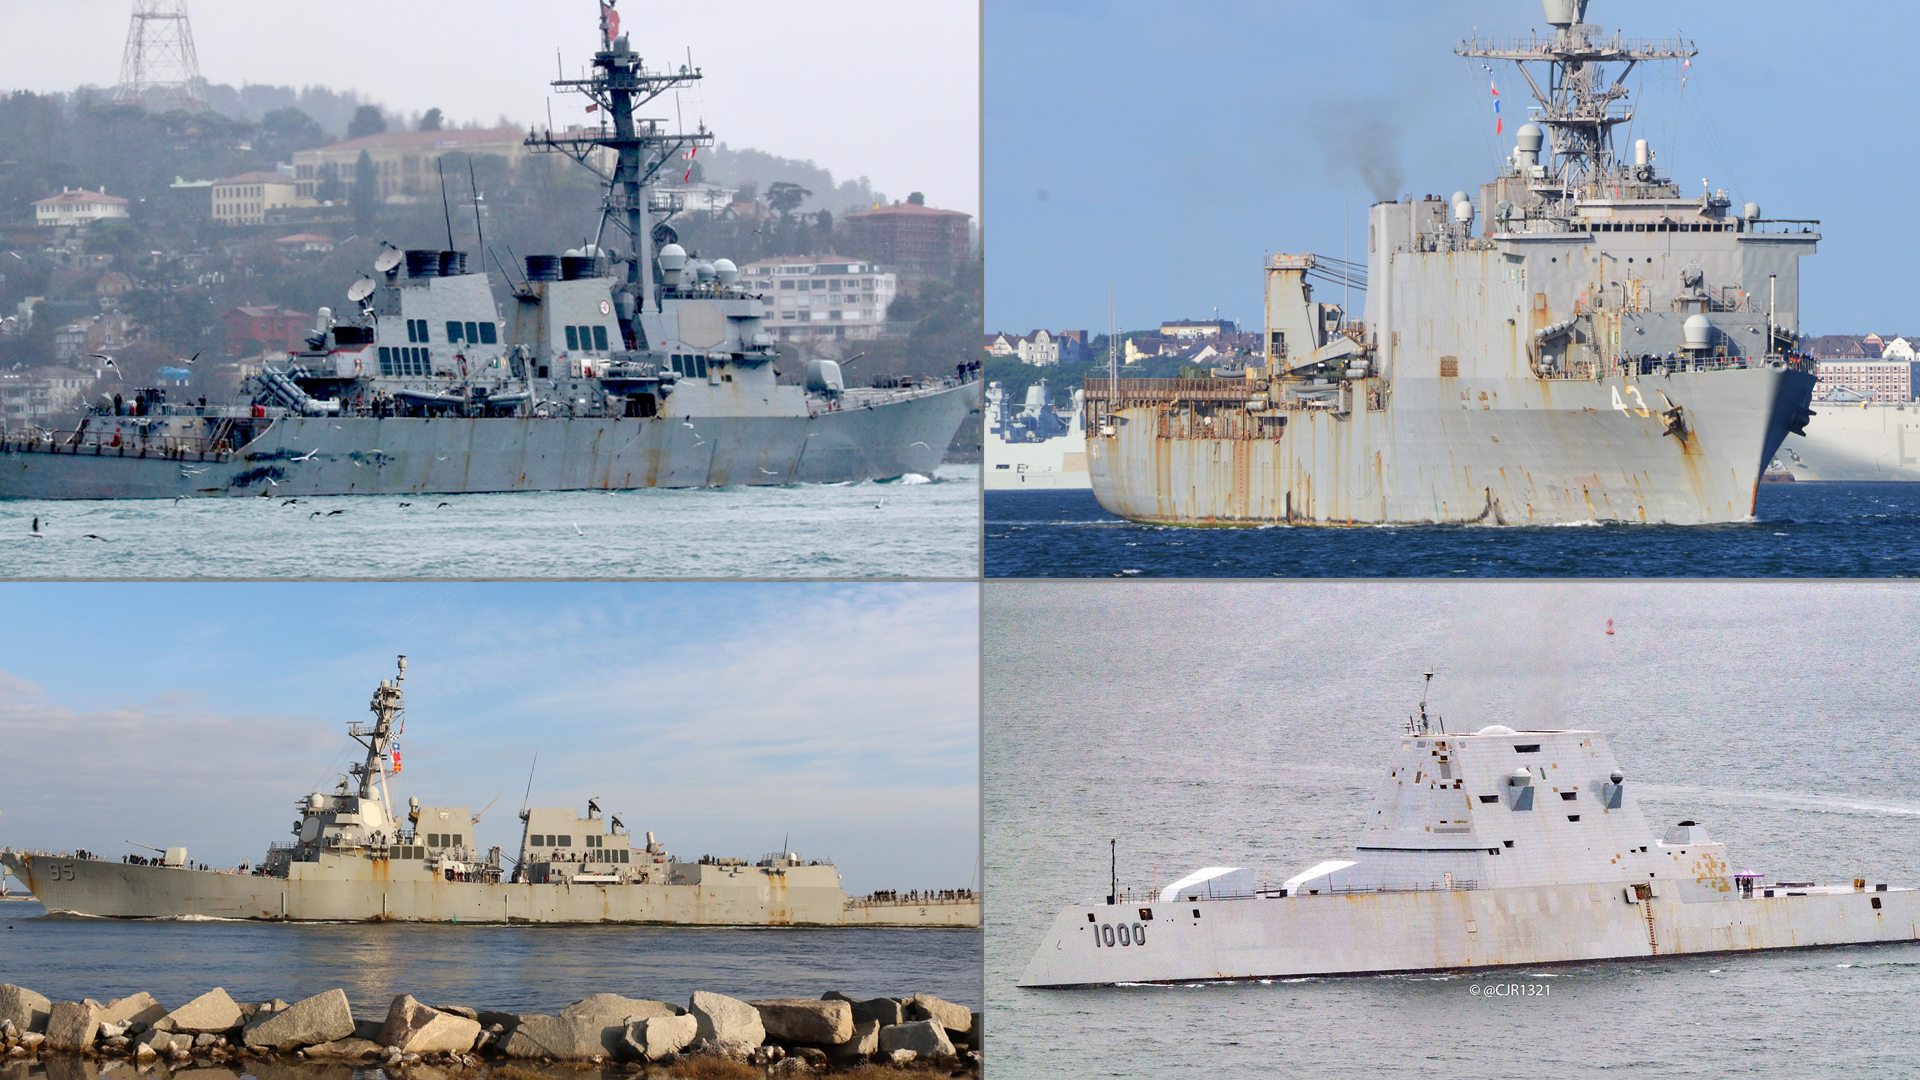 Task & Purpose photo composite showing photos of the USS Arleigh Burke (top left) by Yörük Işık; USS Fort McHenry, by Leo van Ginderen (top right); USS James E Williams, by Steven Smith (lower left); and USS Zumwalt by @cjr1321 (lower right).